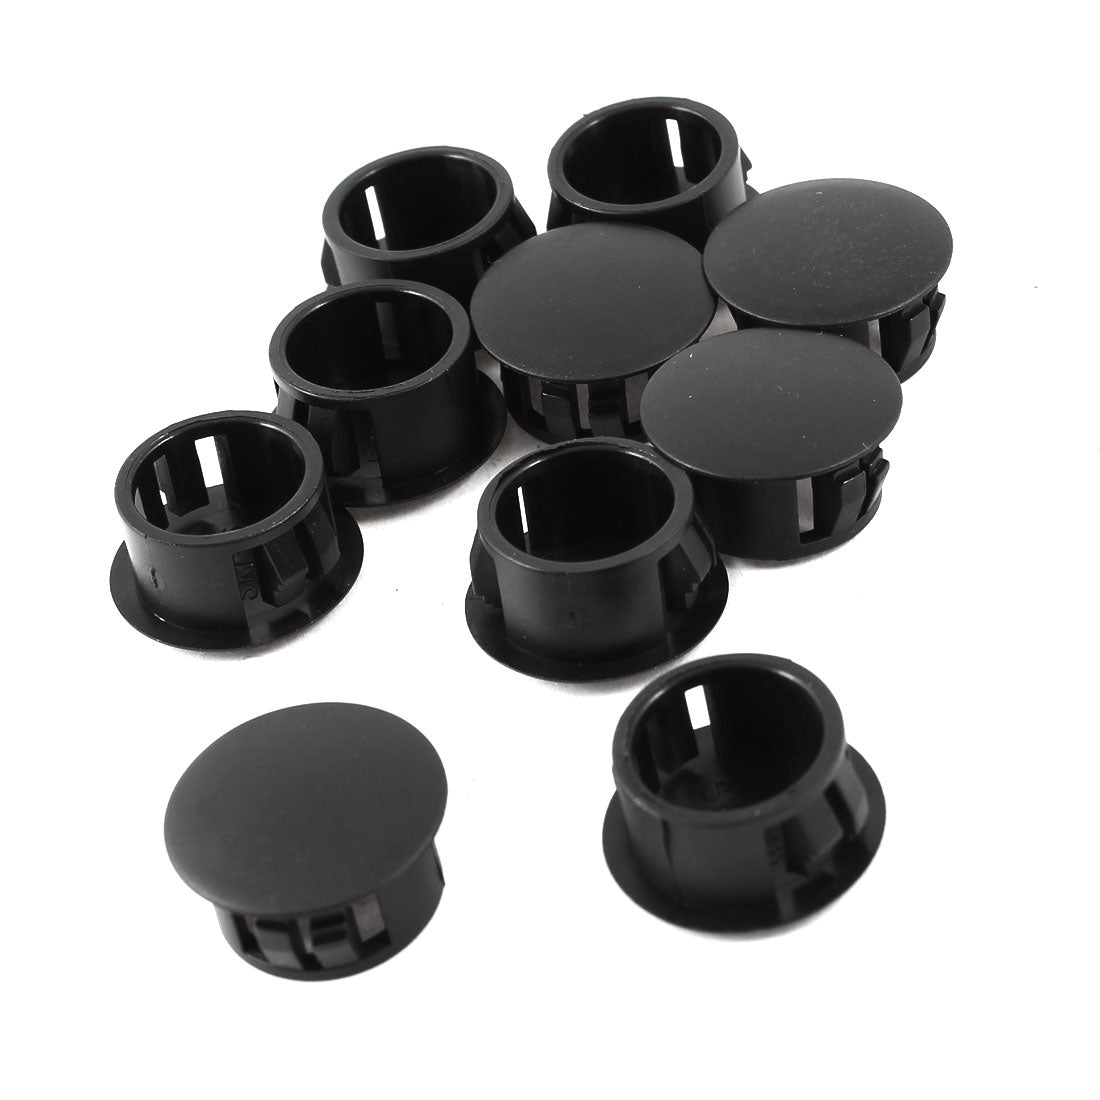 uxcell Uxcell 10pcs Black Plastic 16mm Diameter Snap in Type Locking Hole Button Cover 16mm x 20mm x 10mm